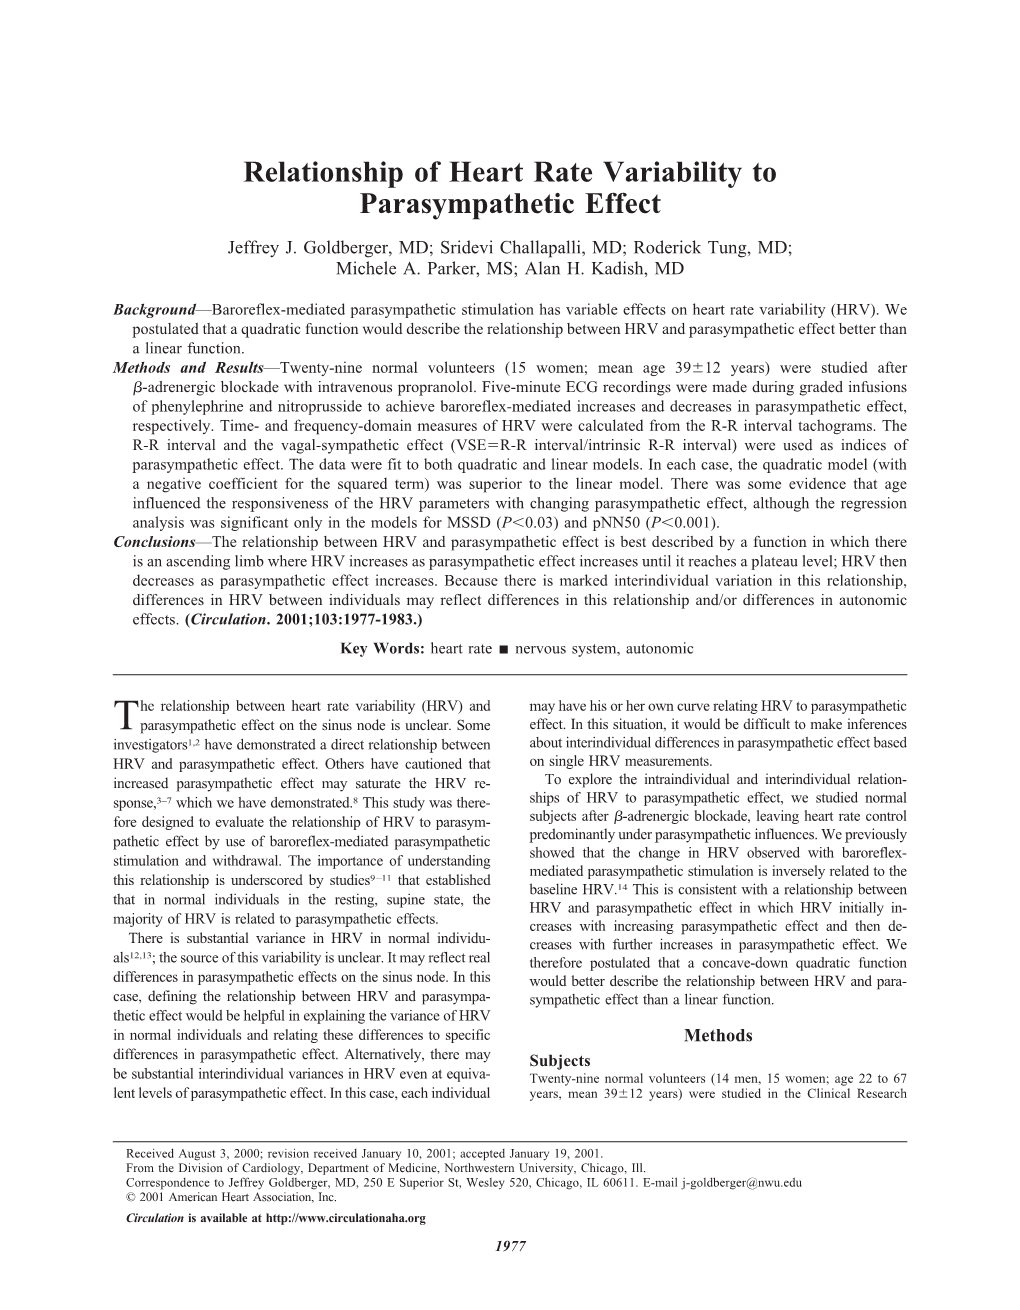 Relationship of Heart Rate Variability to Parasympathetic Effect